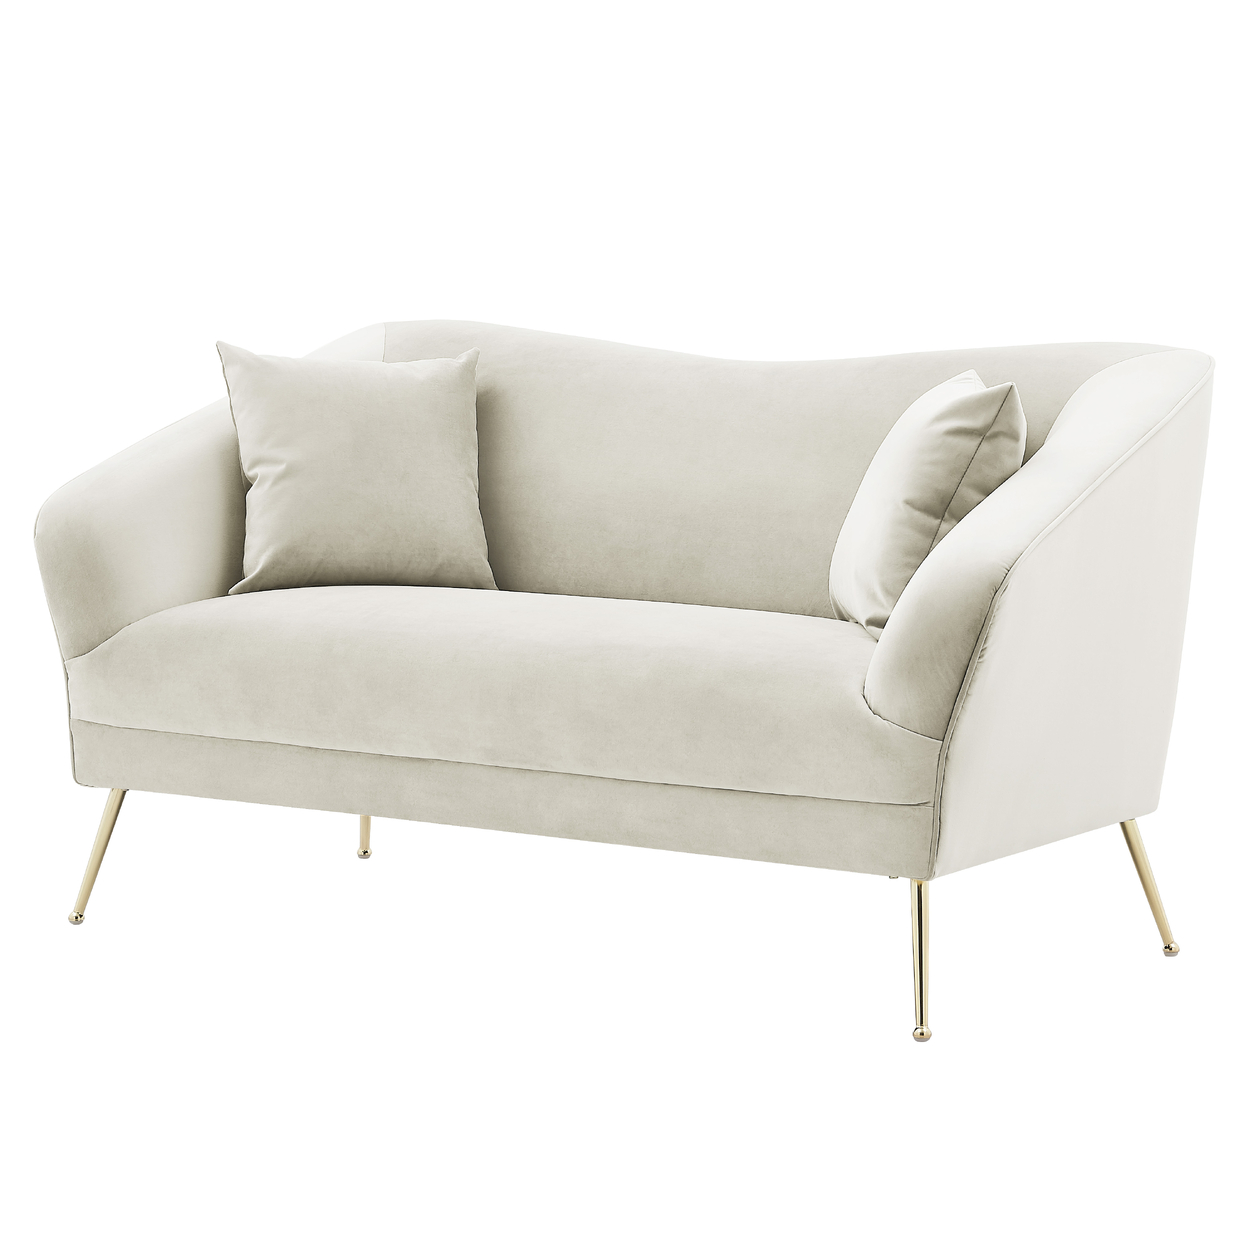 Iconic Home Ember Loveseat Velvet Upholstered Tight Seat Back Design Flared Gold Tone Metal Legs With 2 Decorative Pillows - Grey